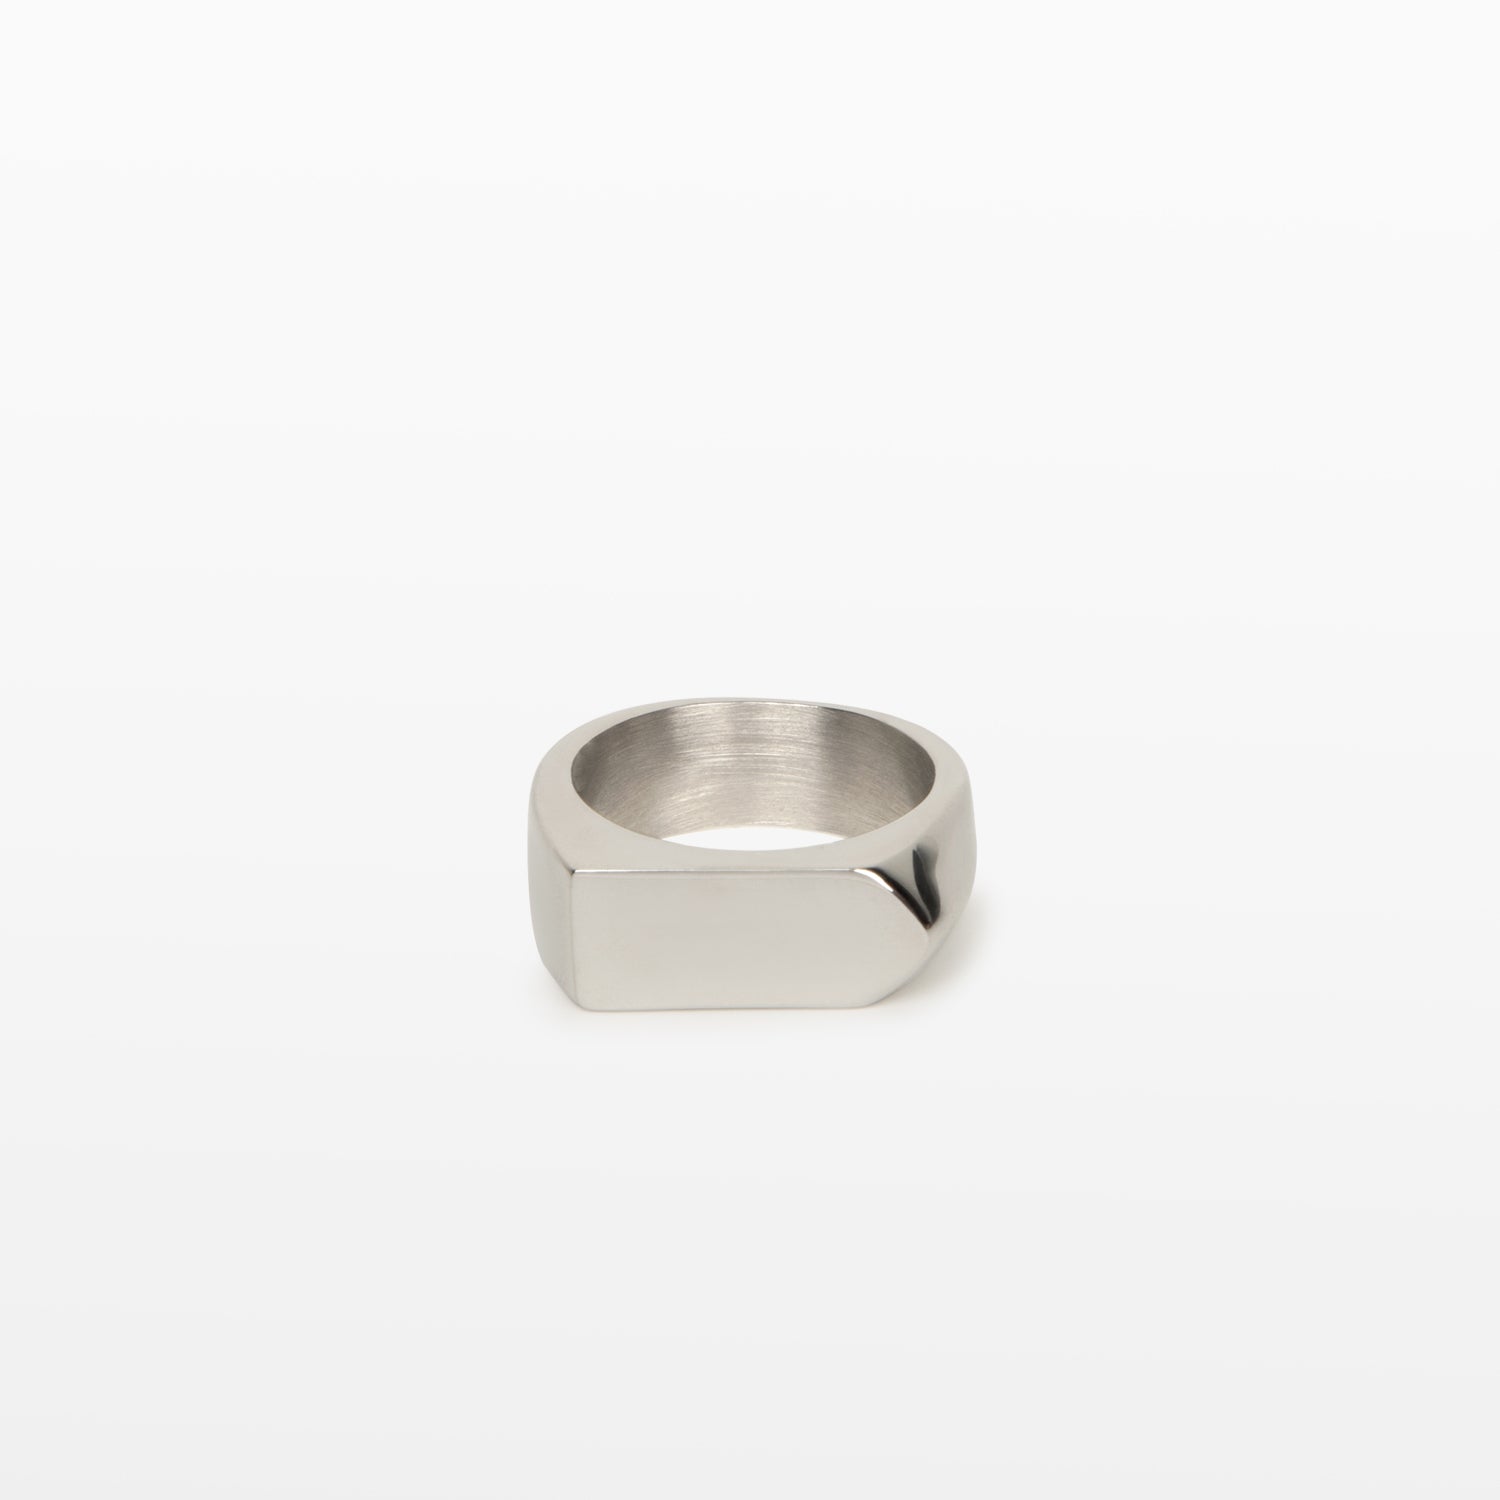 Image of the Pointed Band Ring in Silver is made using stainless steel and has a width of 8mm. Its superior construction provides lasting durability and protection from water damage and tarnishing.